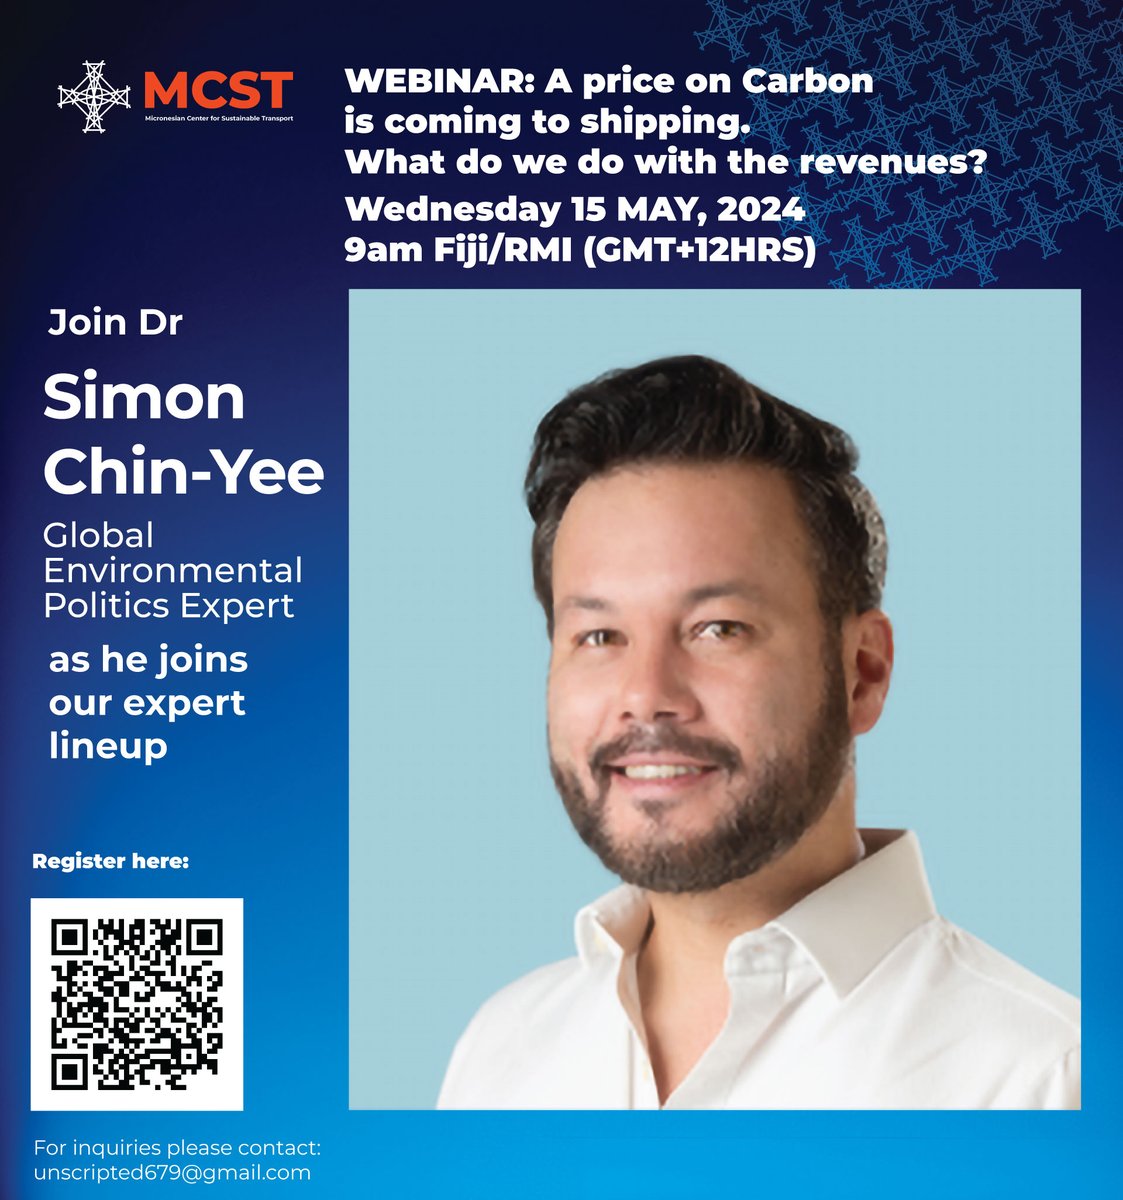 Don't miss Dr. @SimonChinYee, a seasoned expert with over 15 years of dedicated service in international cooperation and policy on Wed May 15, 2024, at 9 am Fiji/RMI time (GMT+12HRS) explore innovative strategies for utilizing carbon revenue. Register now shorturl.at/qADP3